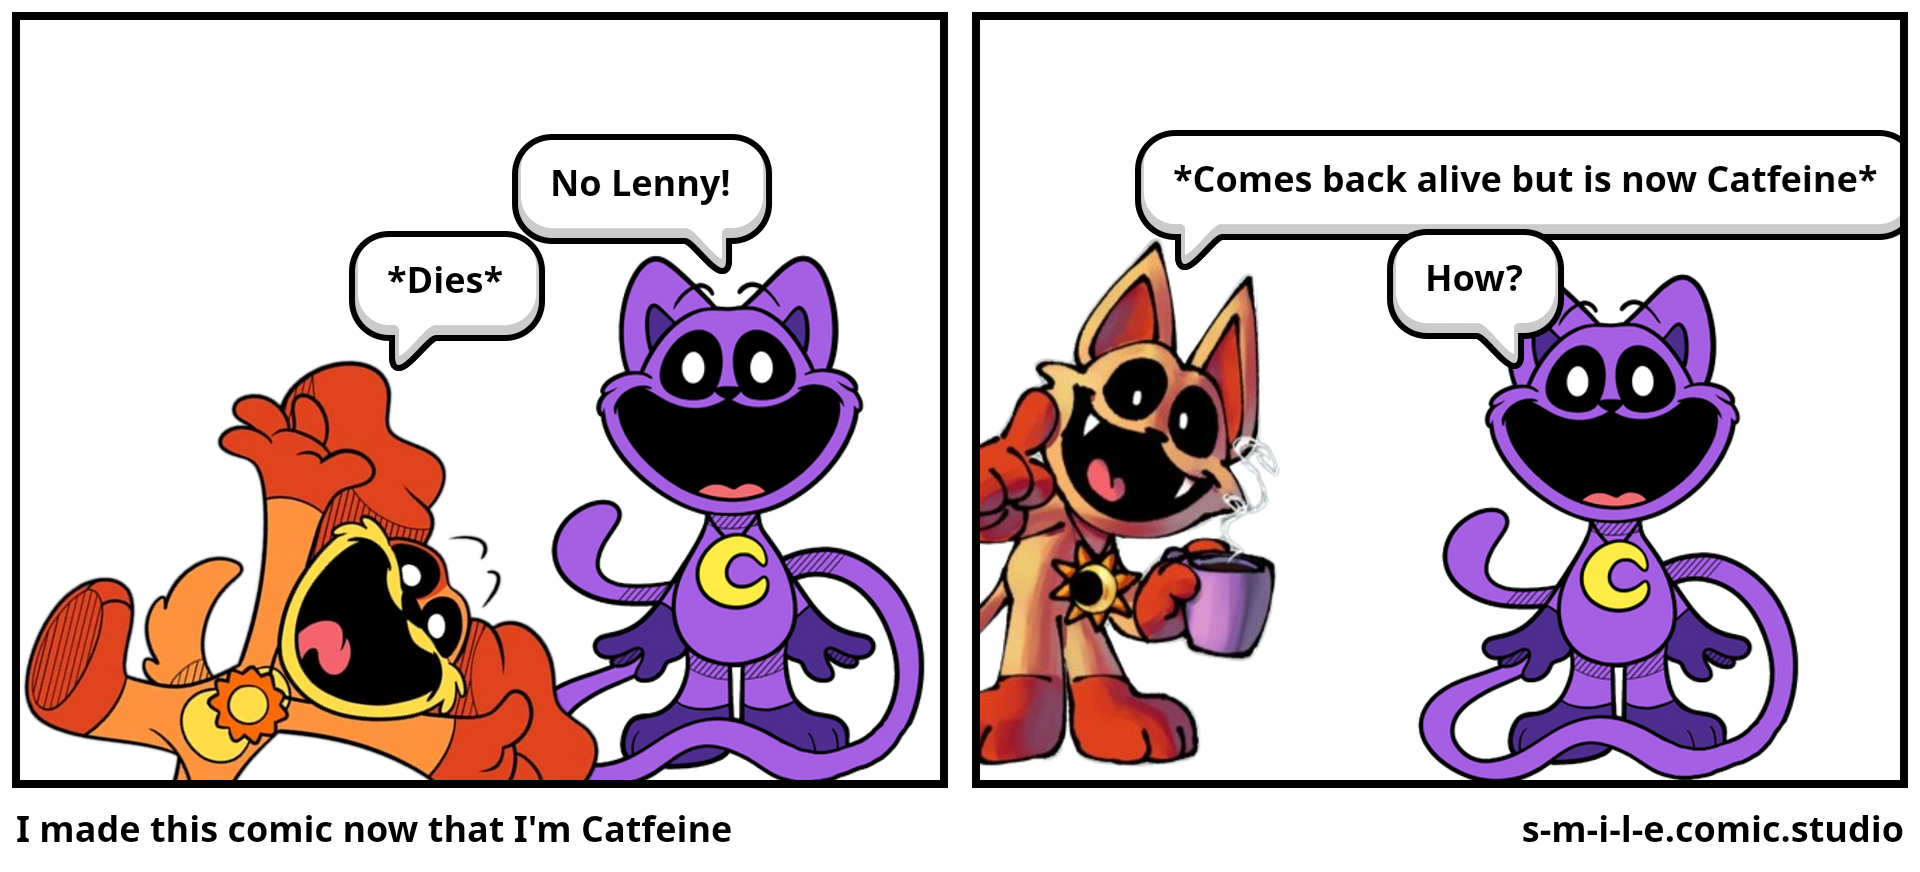 I made this comic now that I'm Catfeine